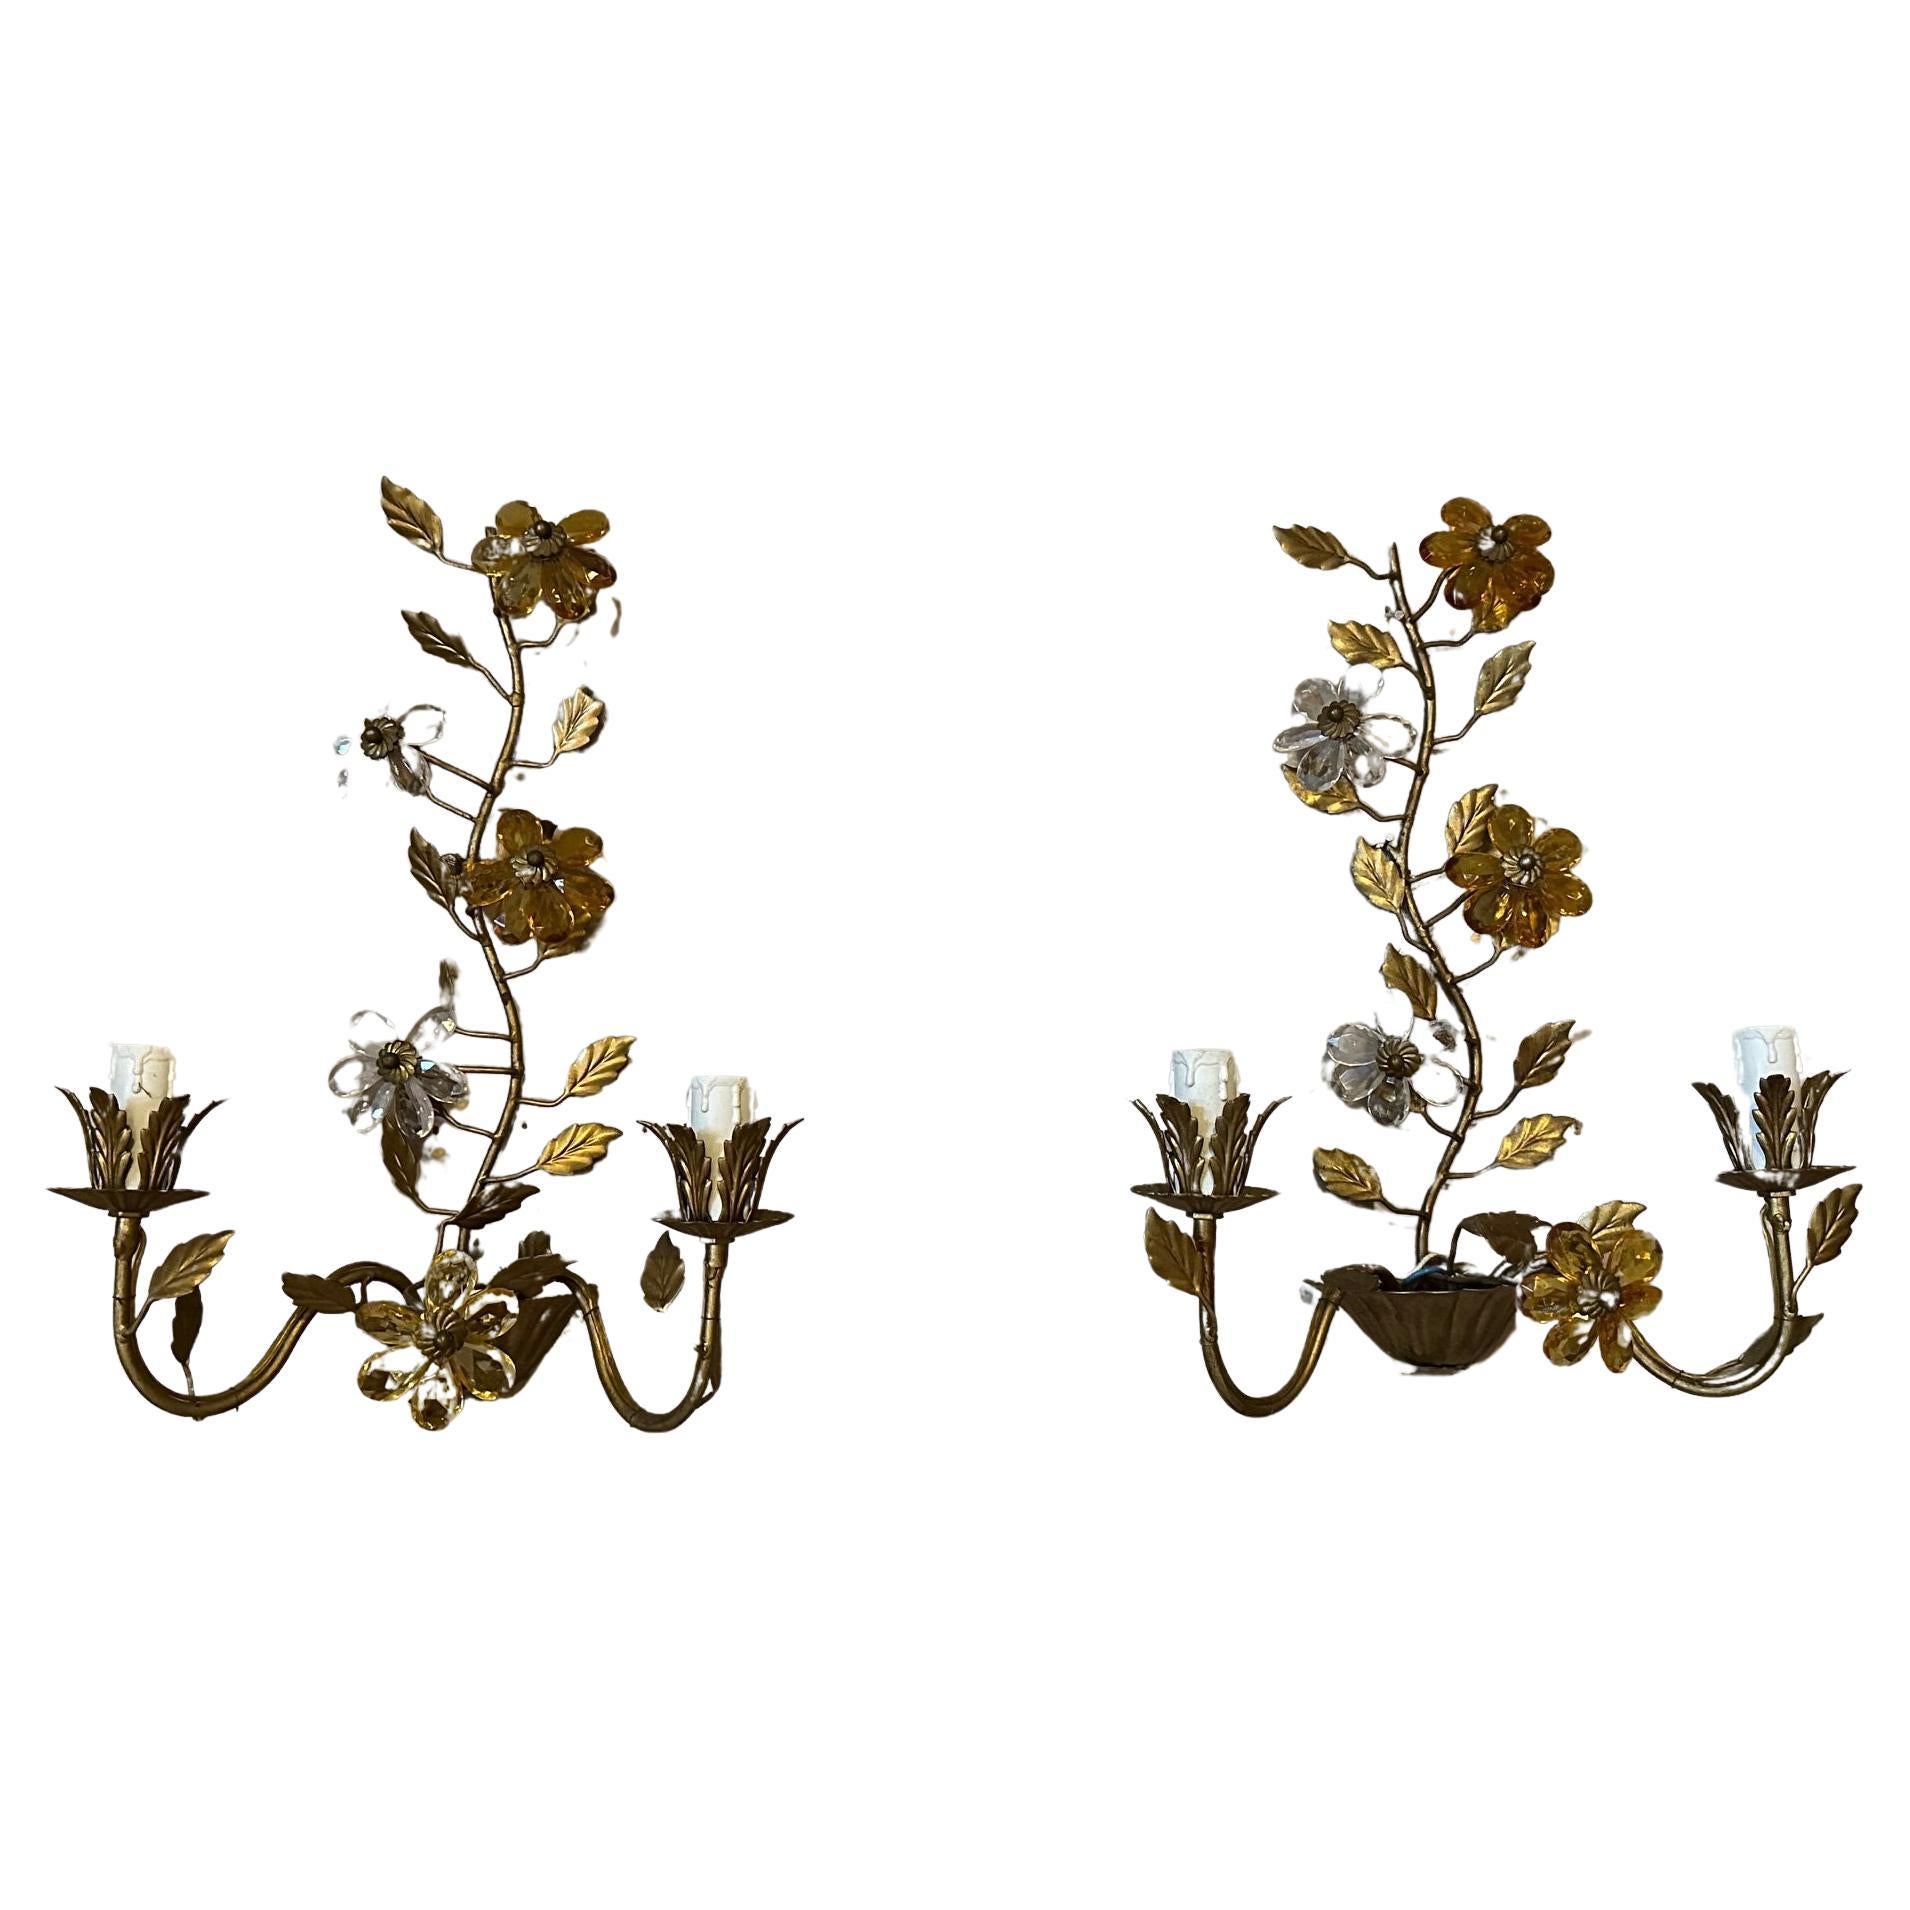 20th century French Pair of Sconces in style of Maison Bagues